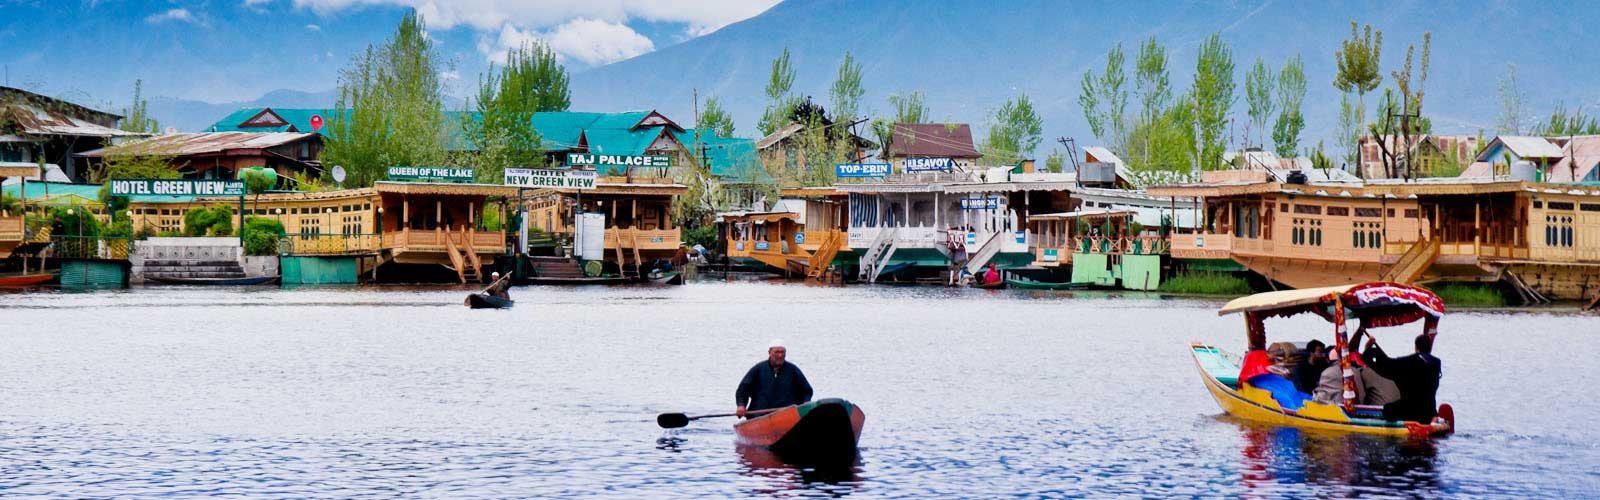 kashmir holiday package by incentives